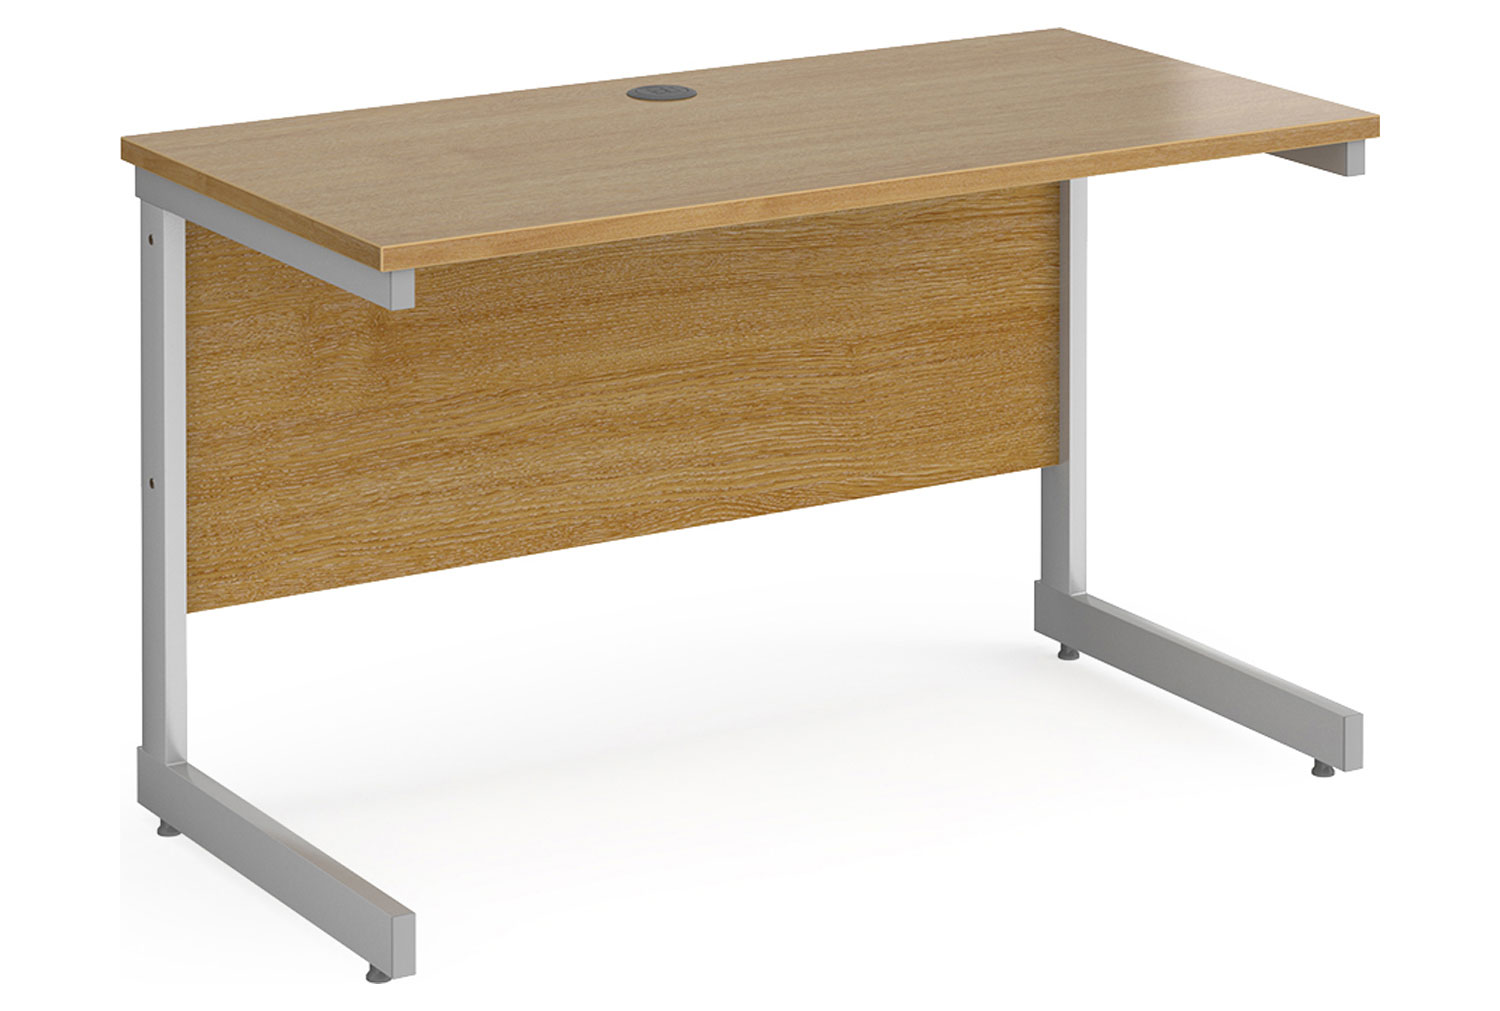 Thrifty Next-Day Narrow Rectangular Office Desk Oak, 120w60dx73h (cm), Express Delivery